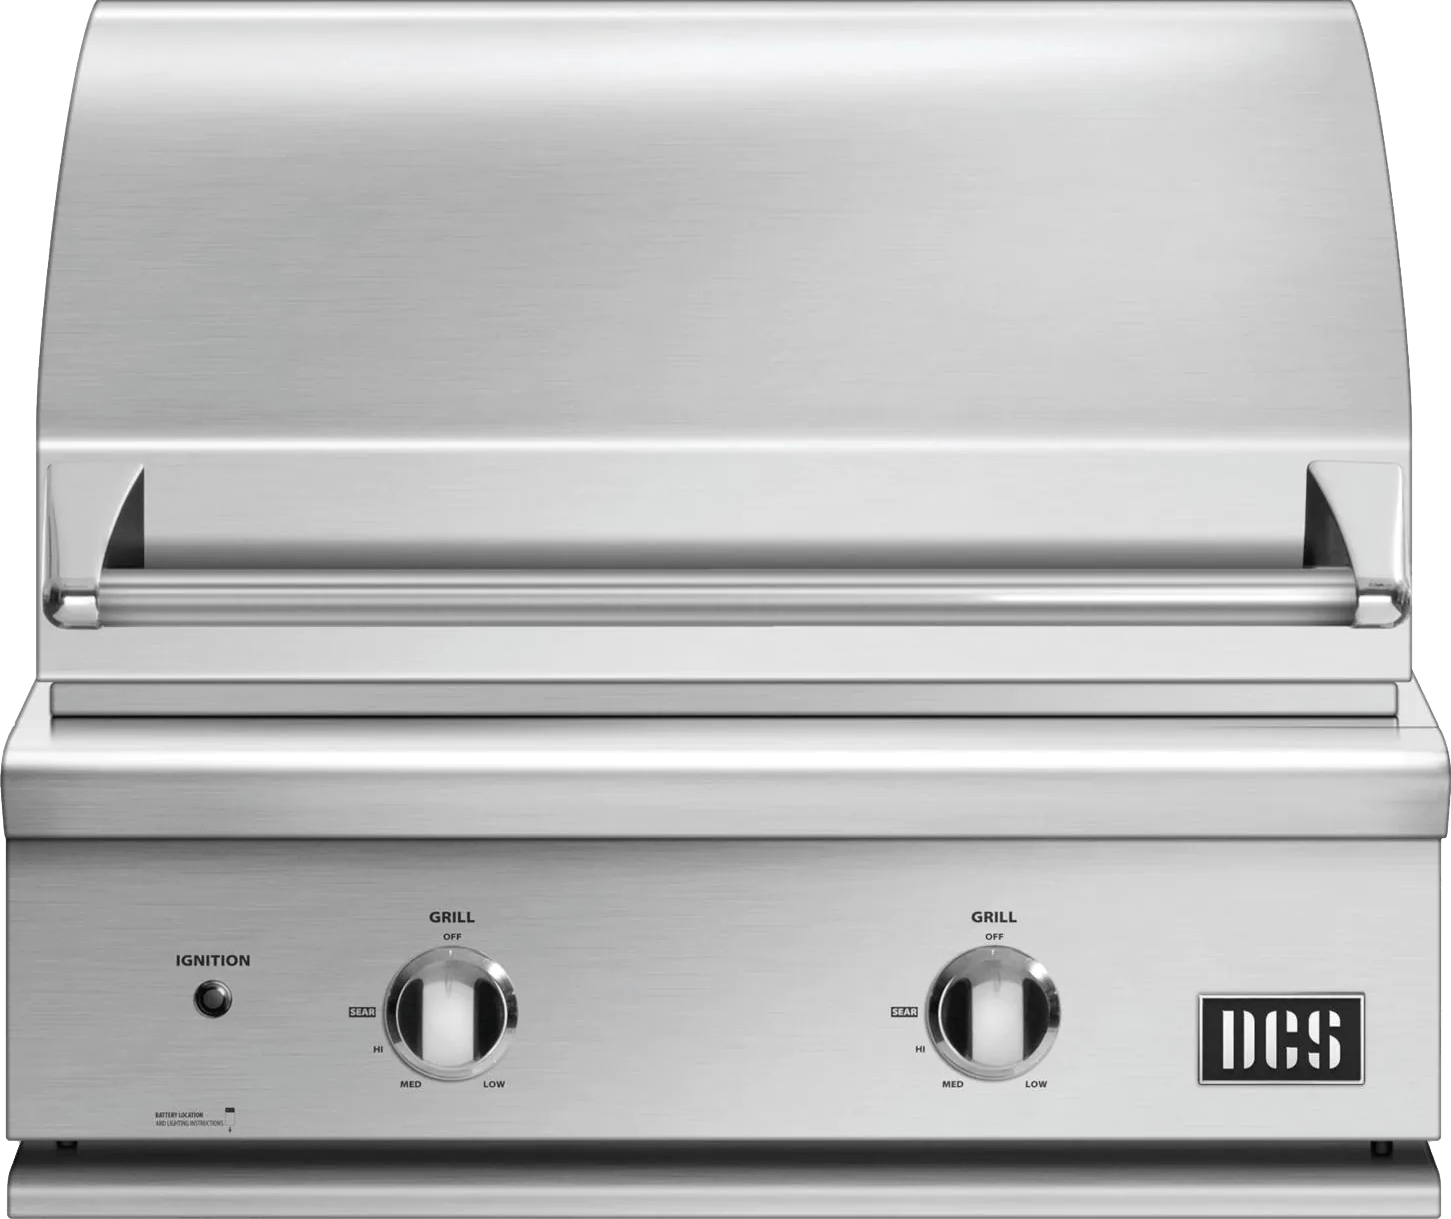 DCS Series 7 Traditional Built-In Gas Grill · 30 in. · Propane